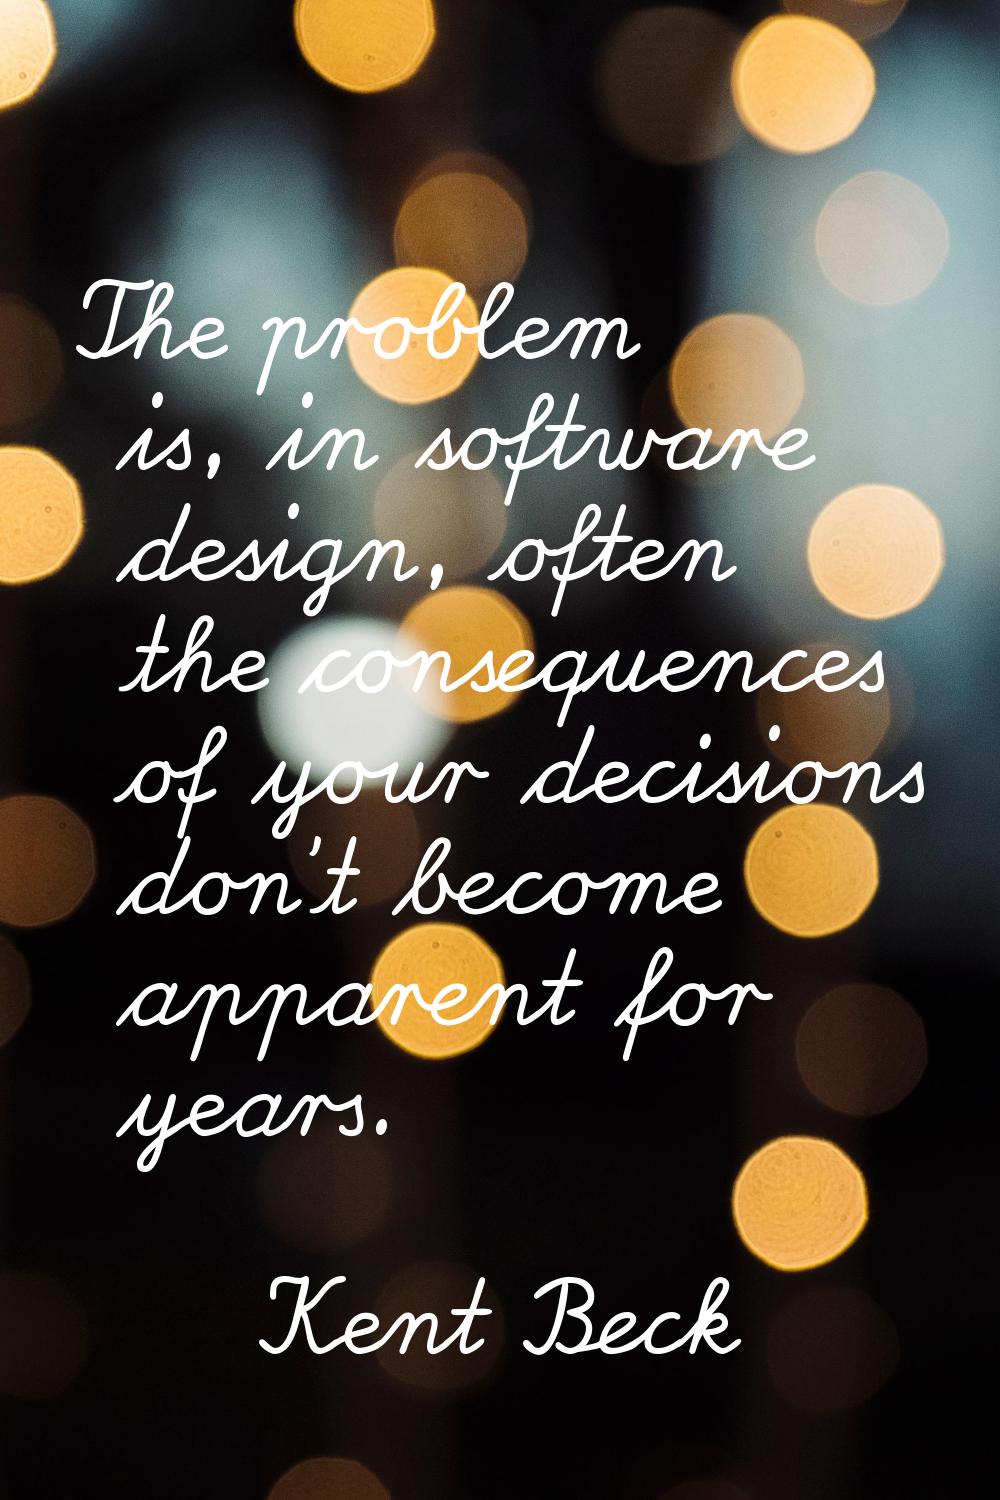 The problem is, in software design, often the consequences of your decisions don't become apparent 